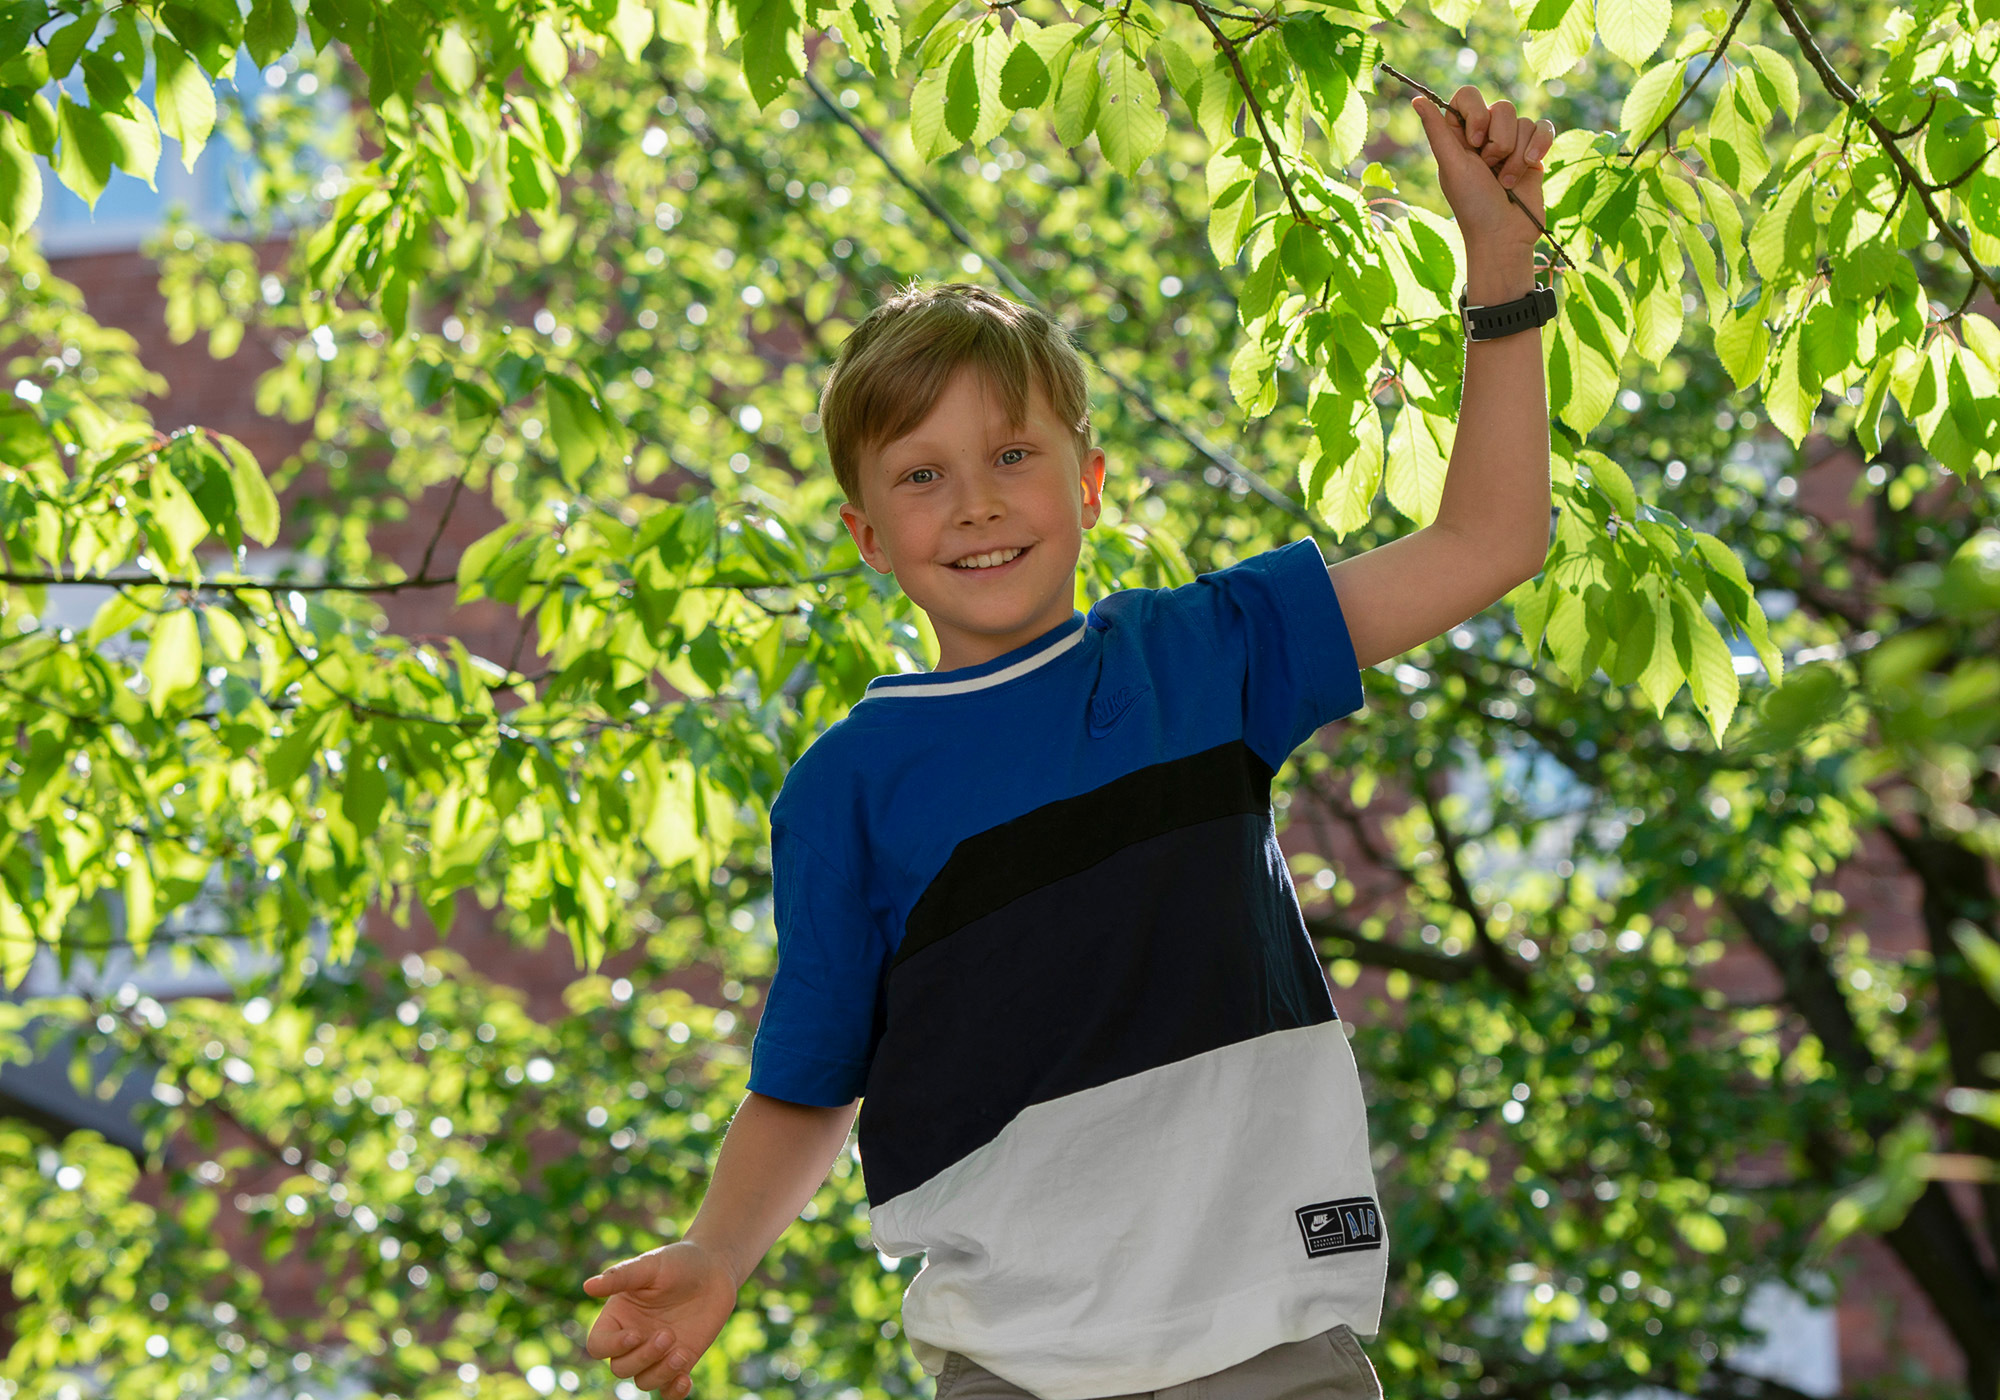 Frank jumping, with green branches in the background.